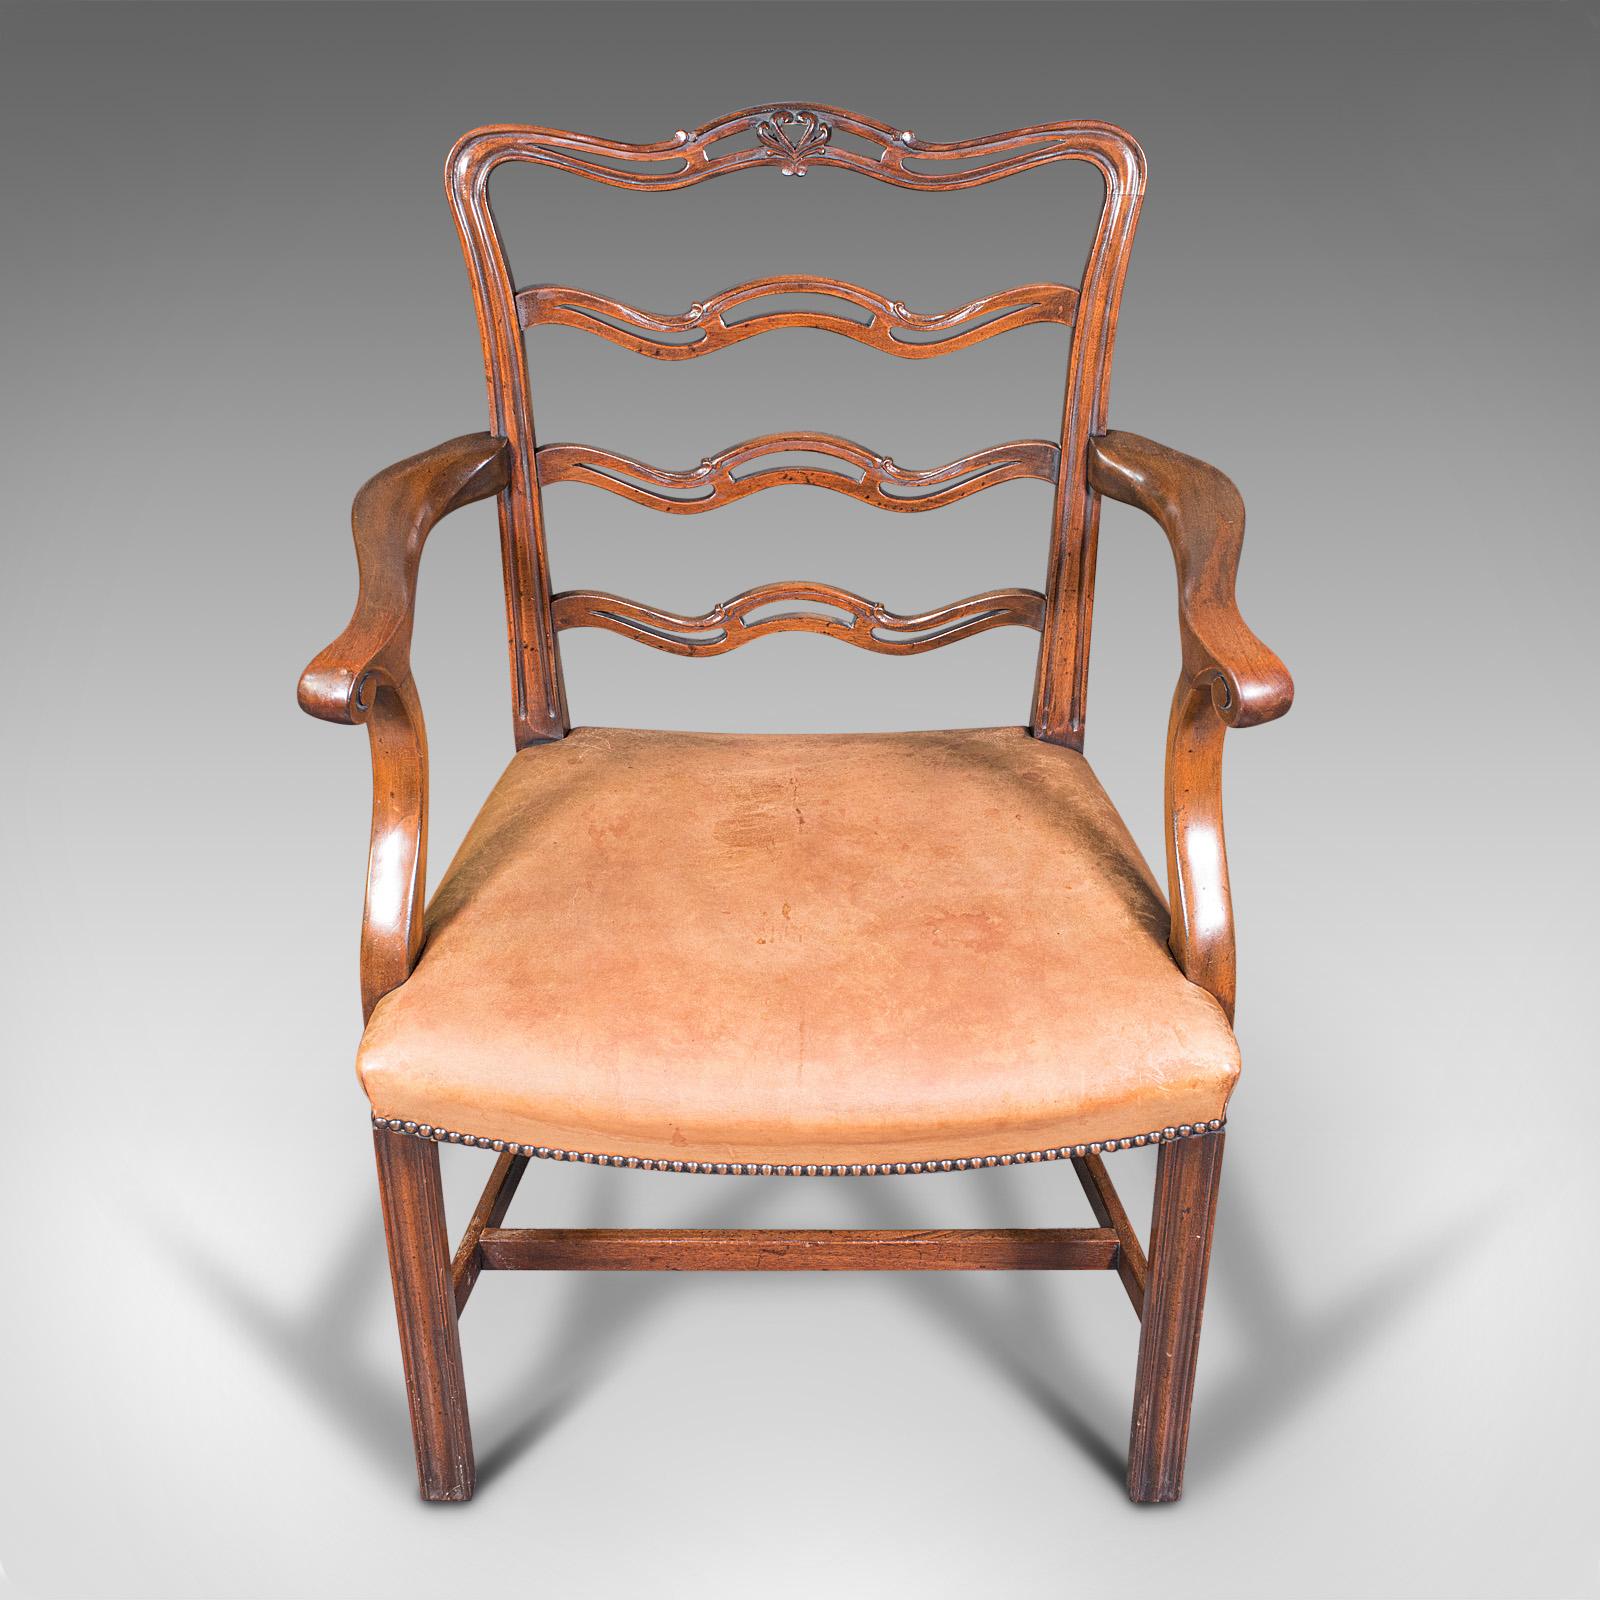 Vintage Ladder Back Study Chair, Irish, Leather, Elbow Seat, Carver, Art Deco For Sale 1